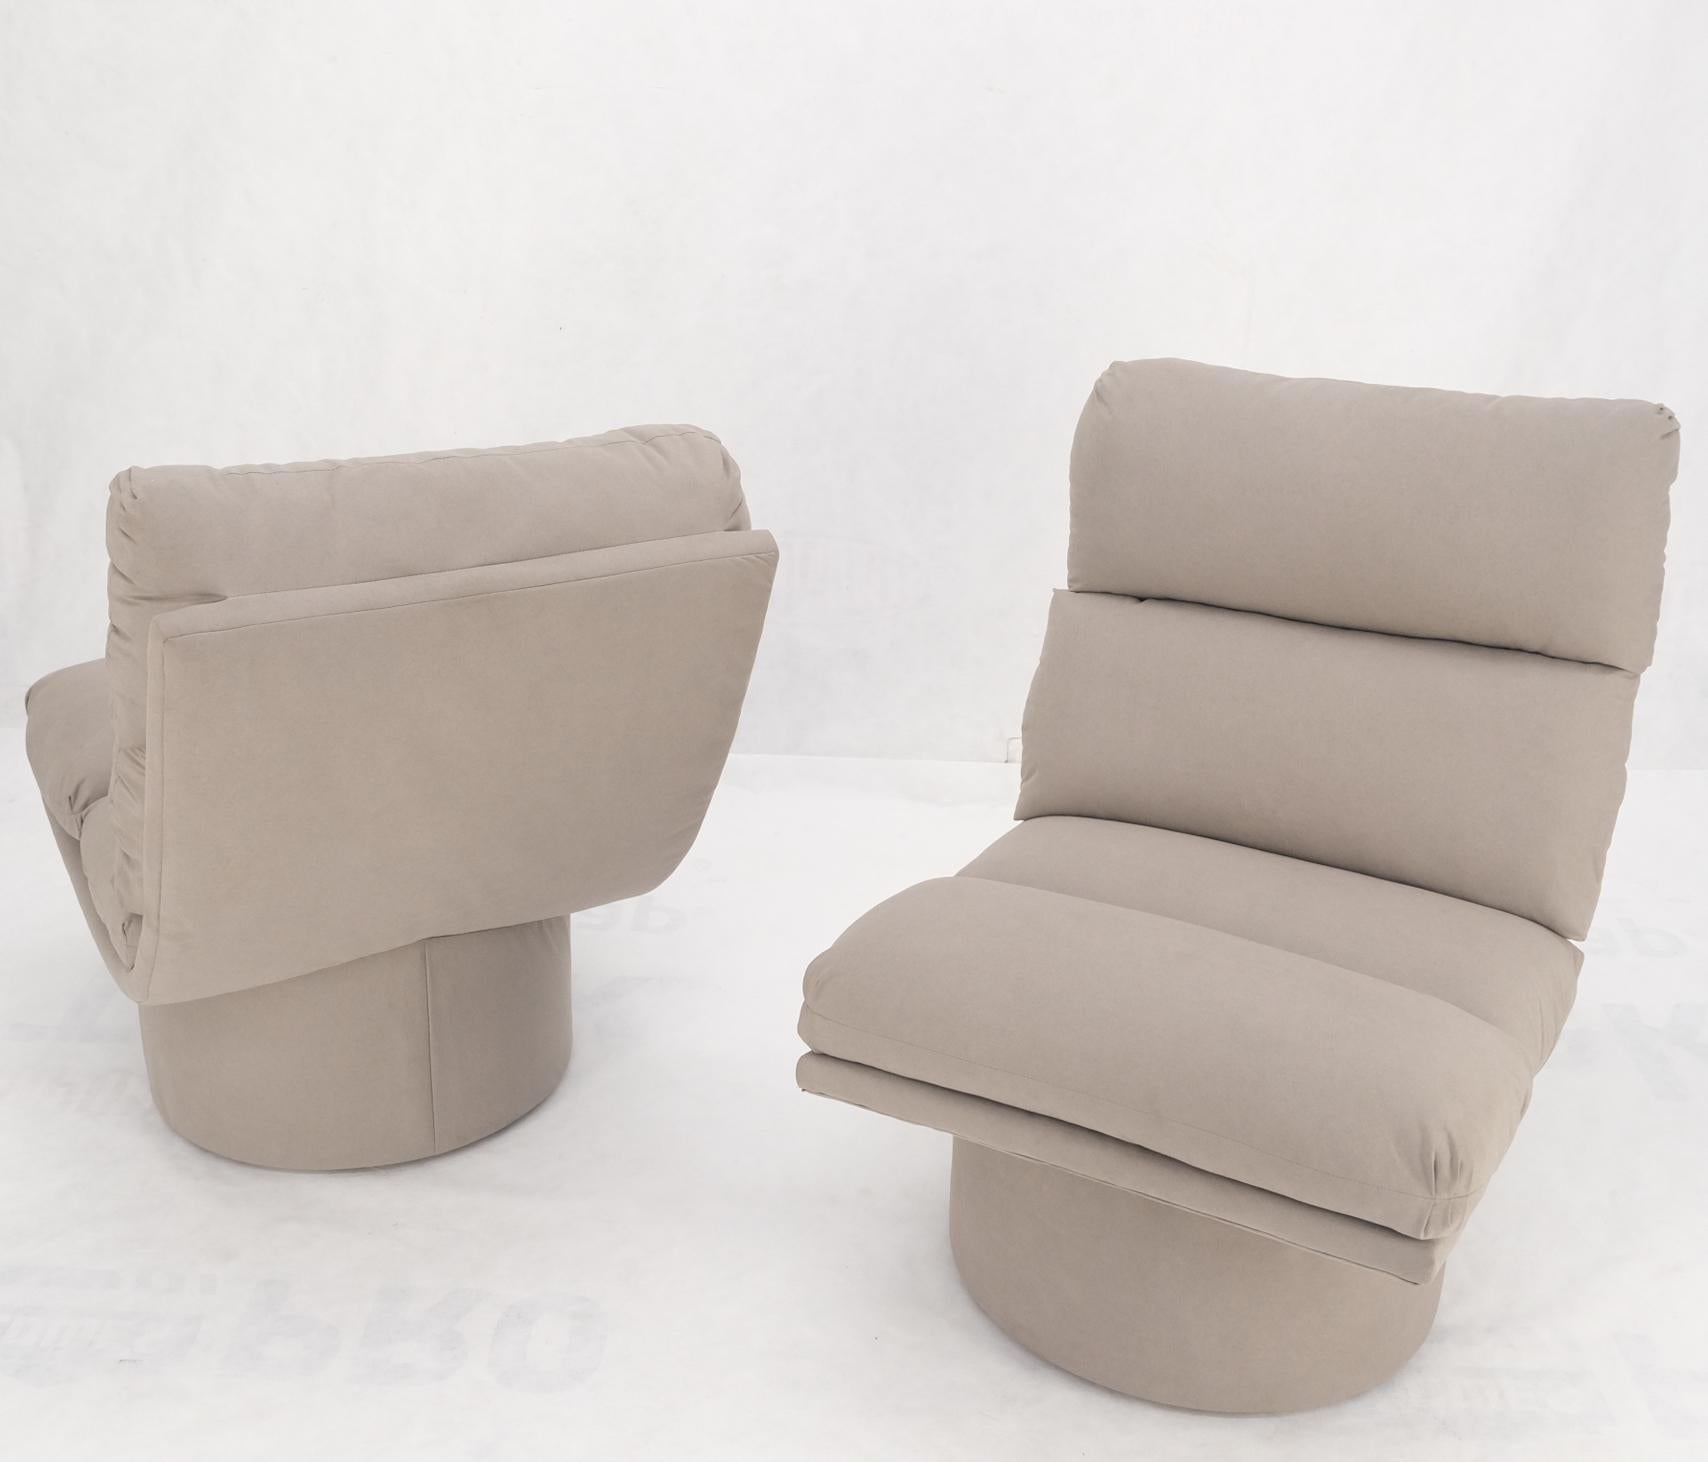 Pair new light coffee to grey Alcantera Upholstery scoop lounge chairs SHARP!.